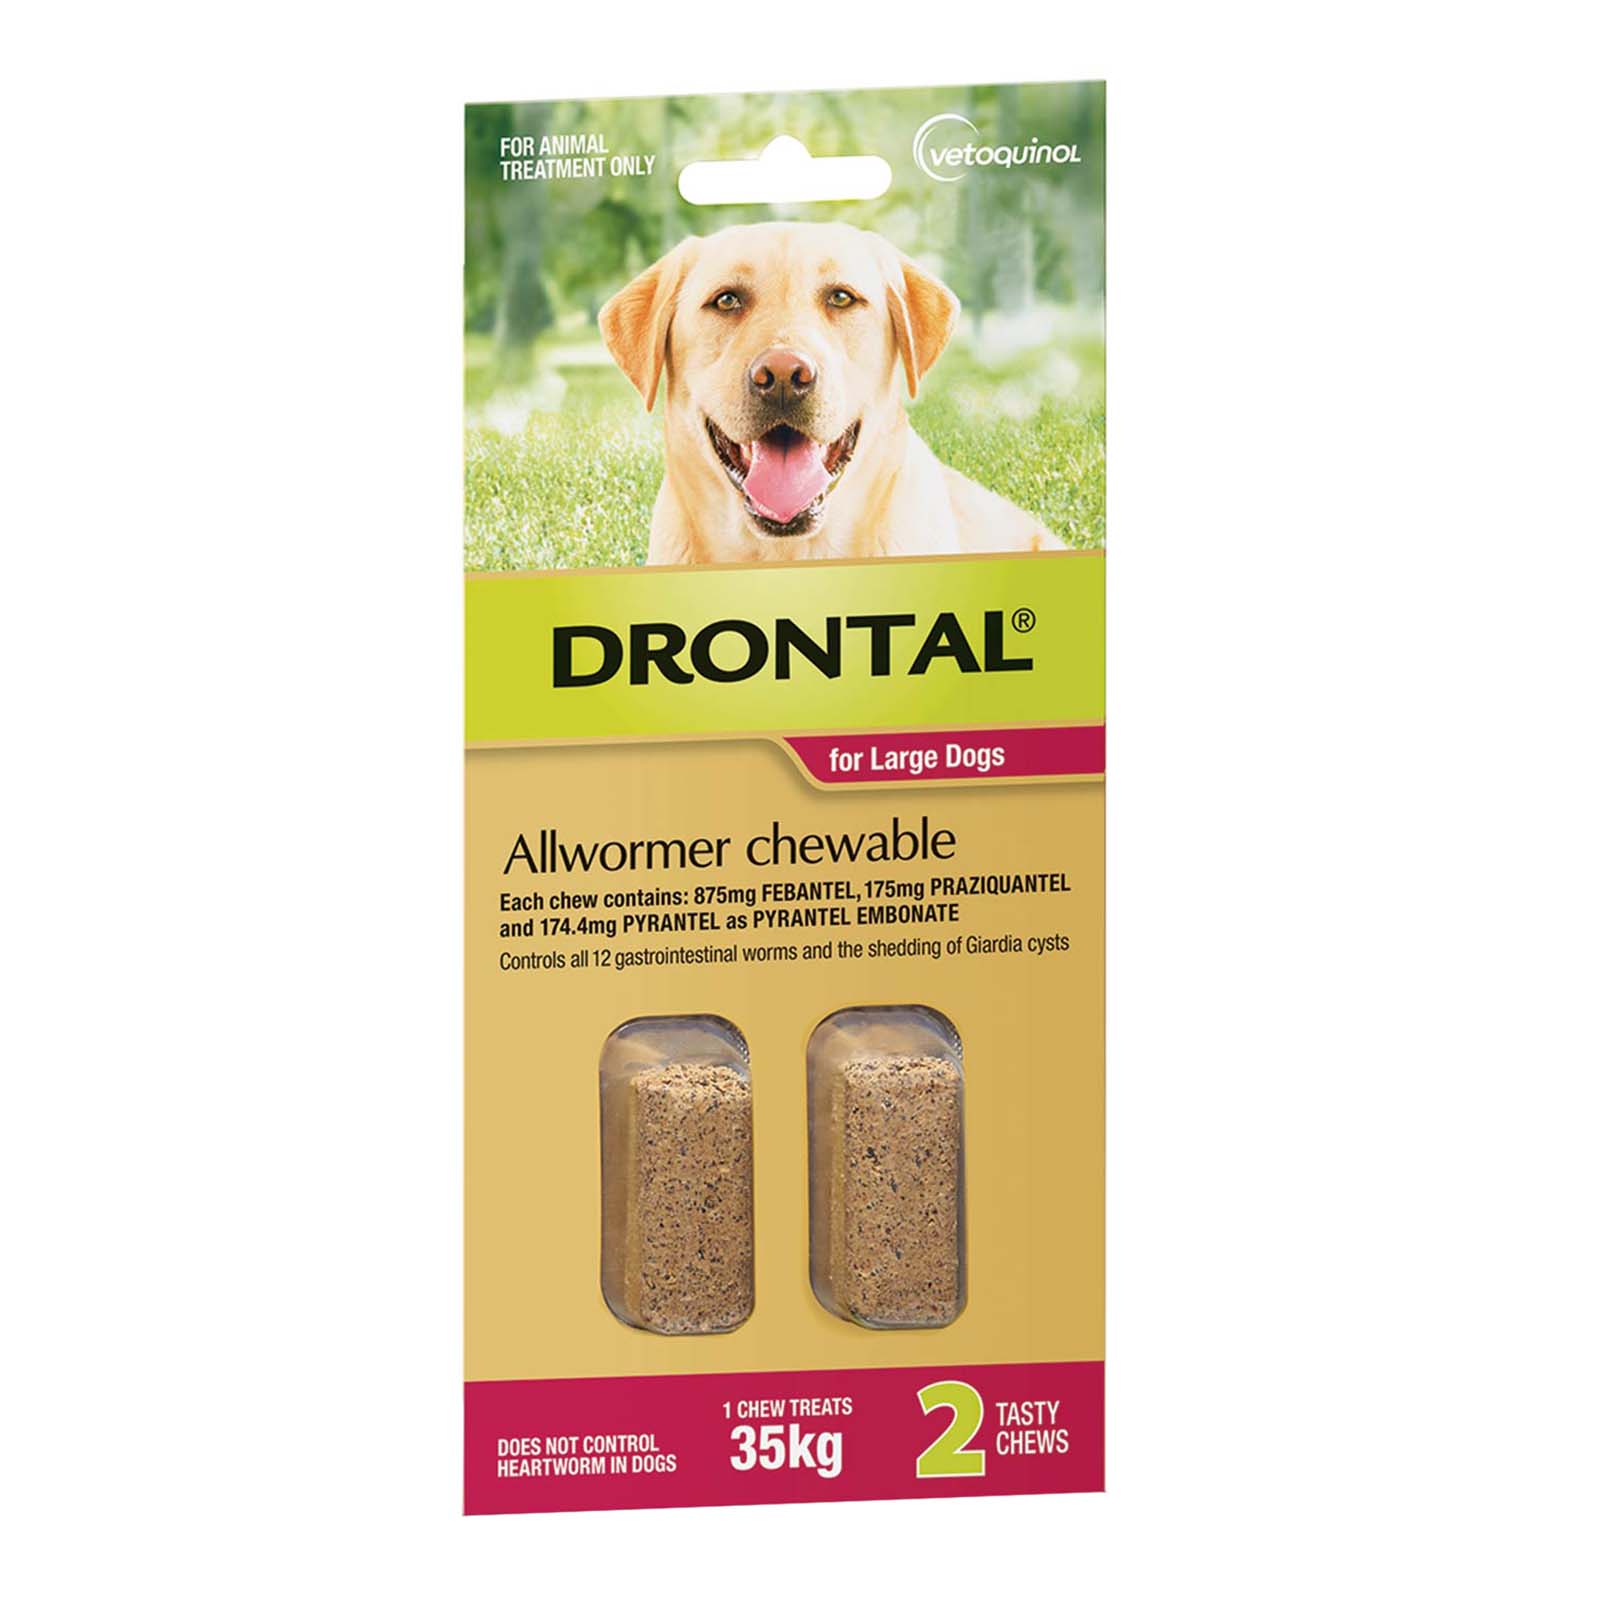 Drontal Wormers - Dogs Wormers Chewables For Dogs Up To 35Kg (Red)